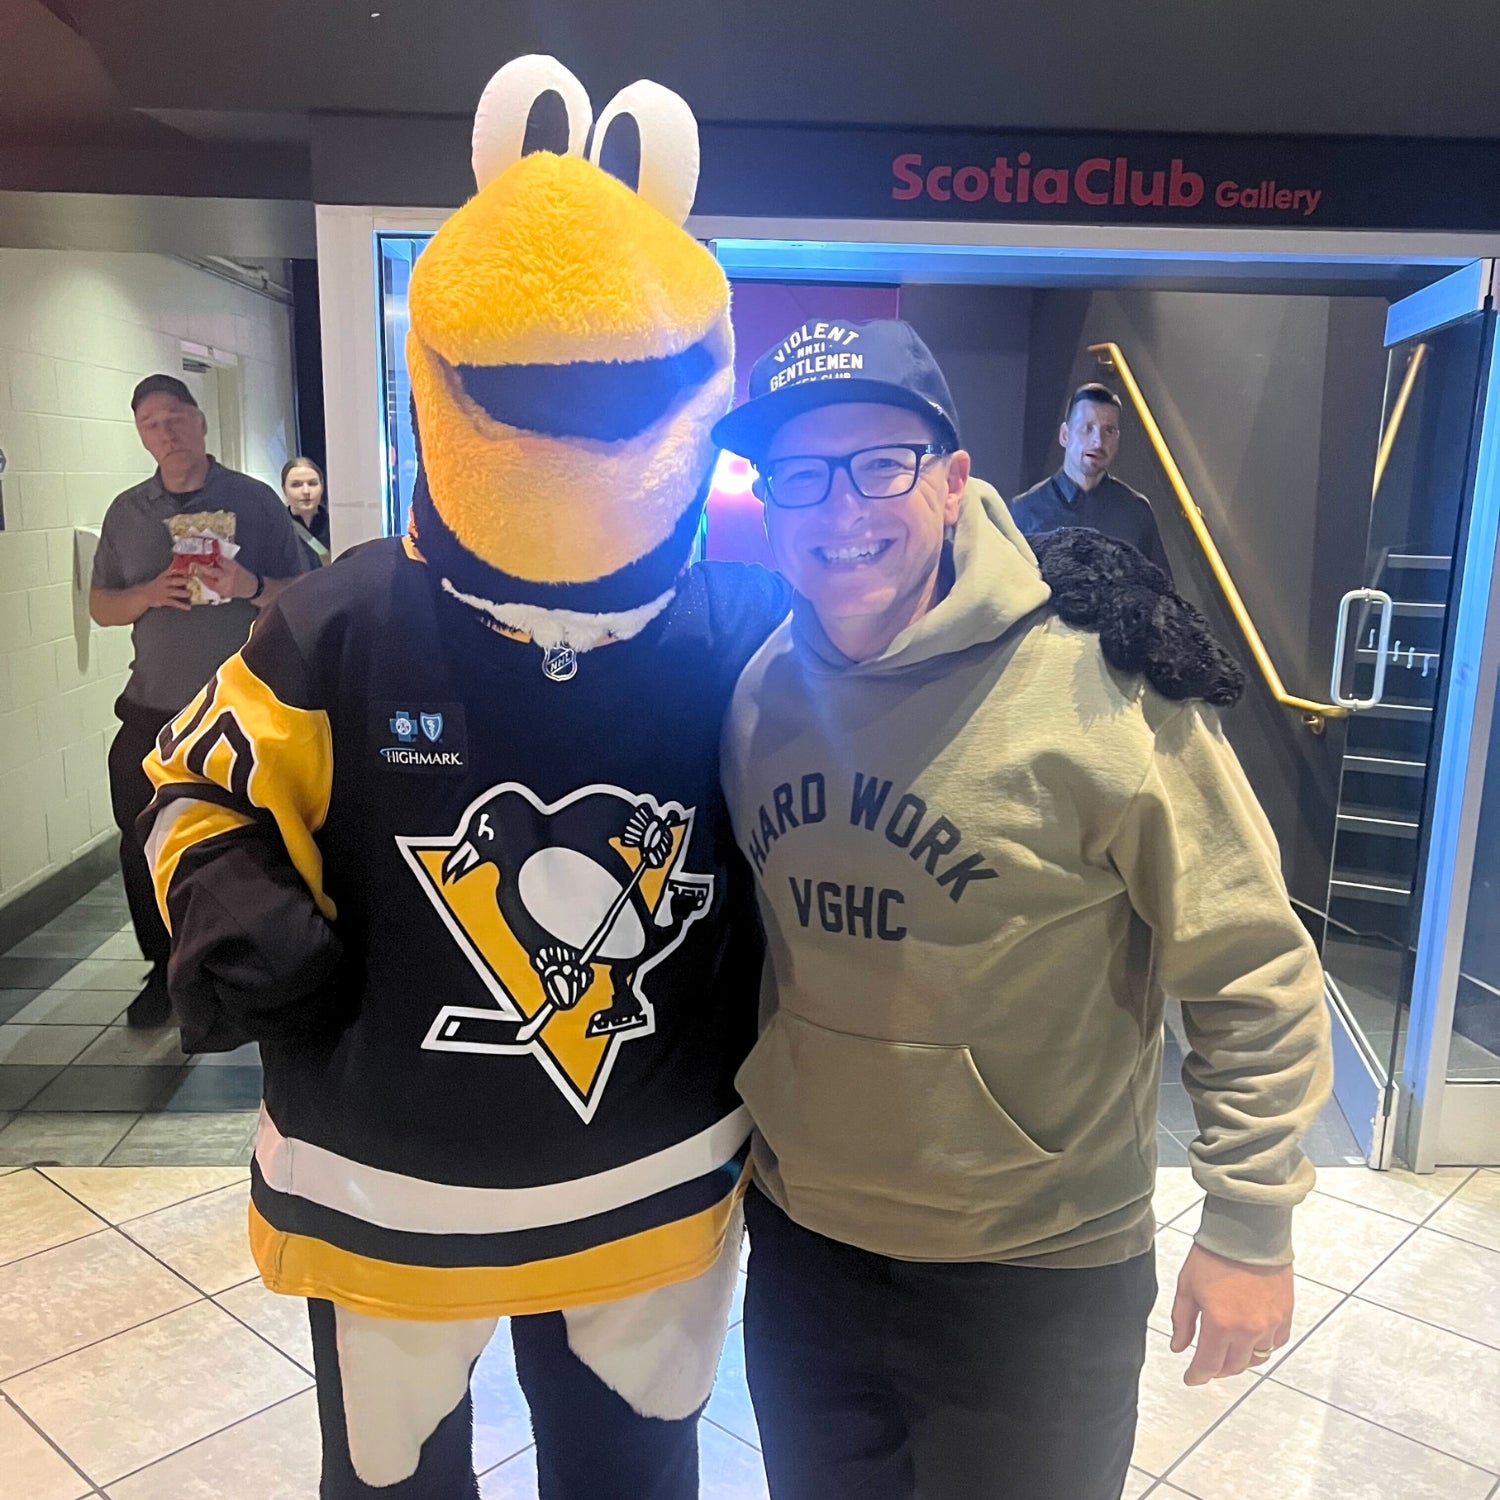 We sent some of the crew out to Toronto a few weeks ago to check out the NHL All Star game for some work and play. Safe to say the trip did not disappoint! Delseyfly metoparis's very own "dad" reflects back on his trip to share some of the highlights. Check it out!